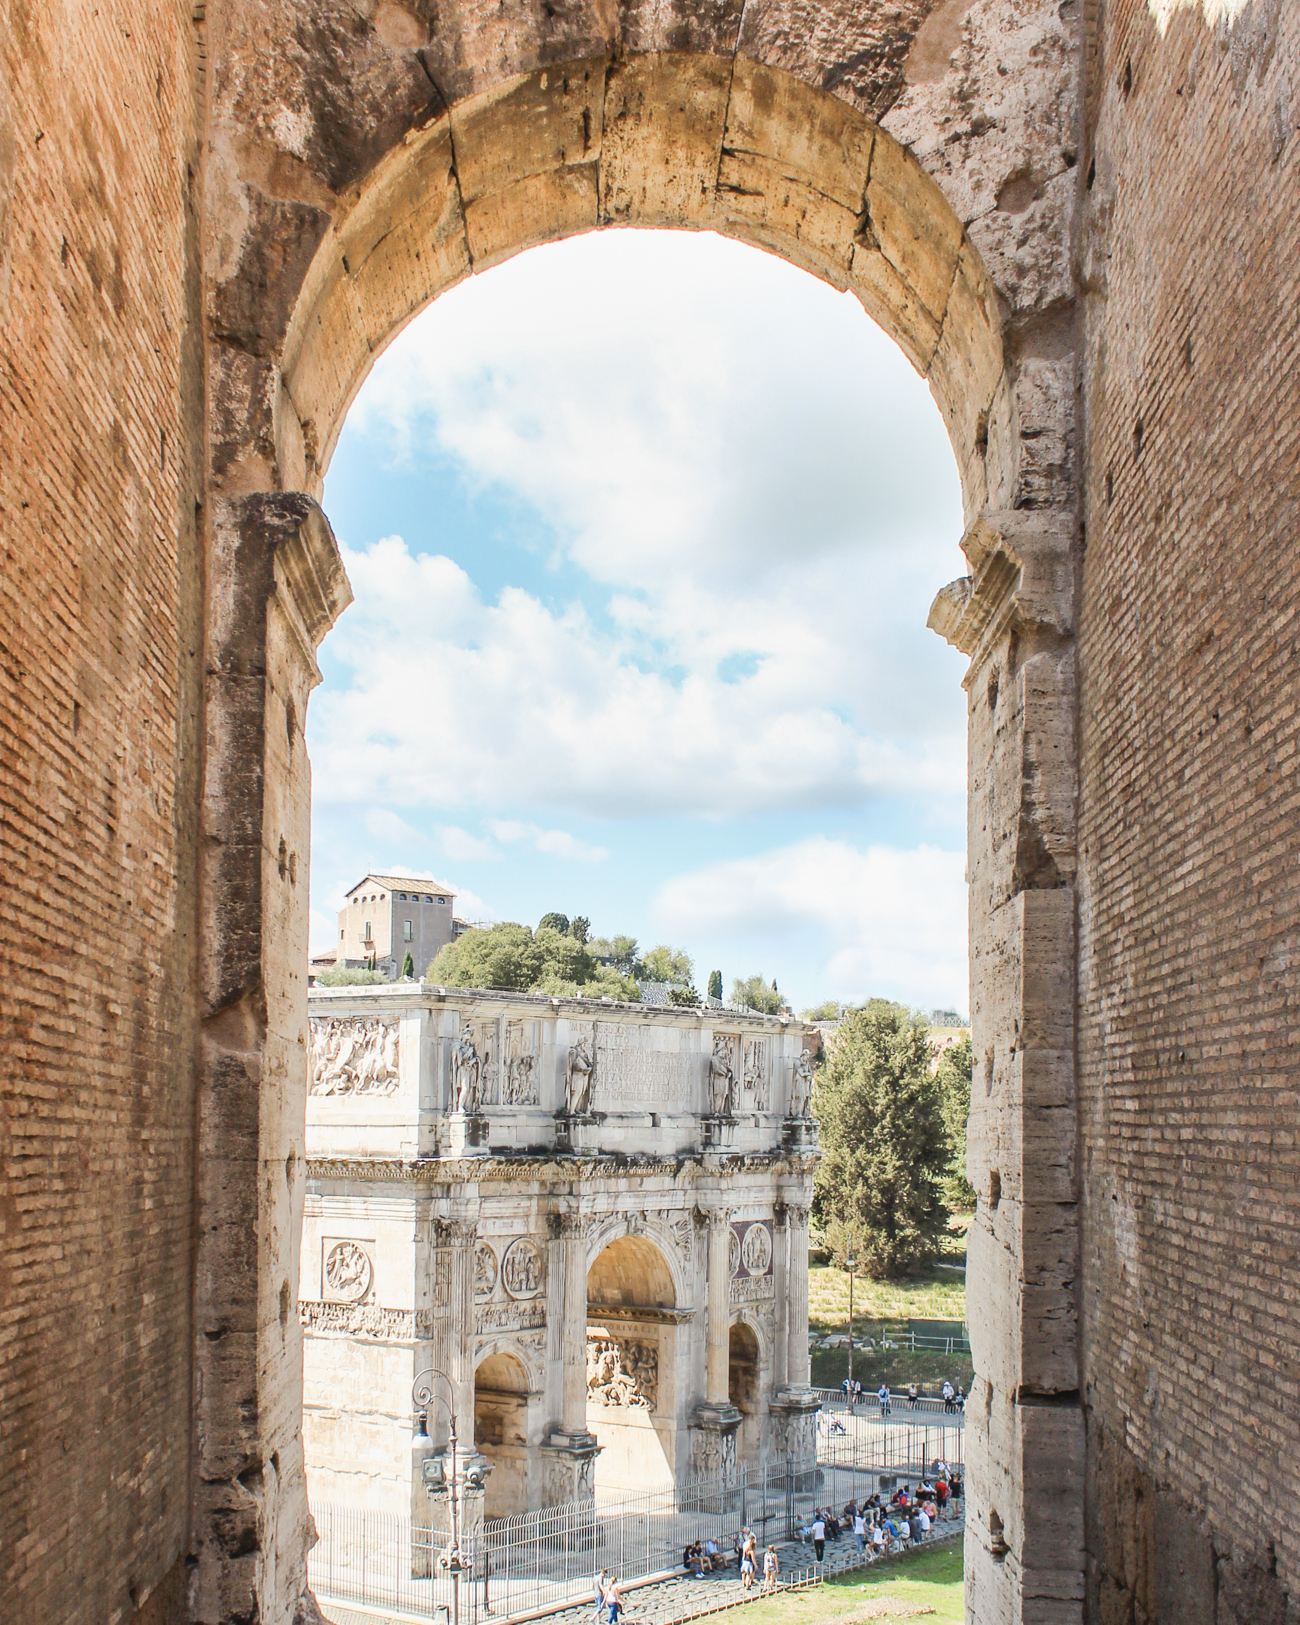 25 Things you Must do in Rome - Arch of Trajan